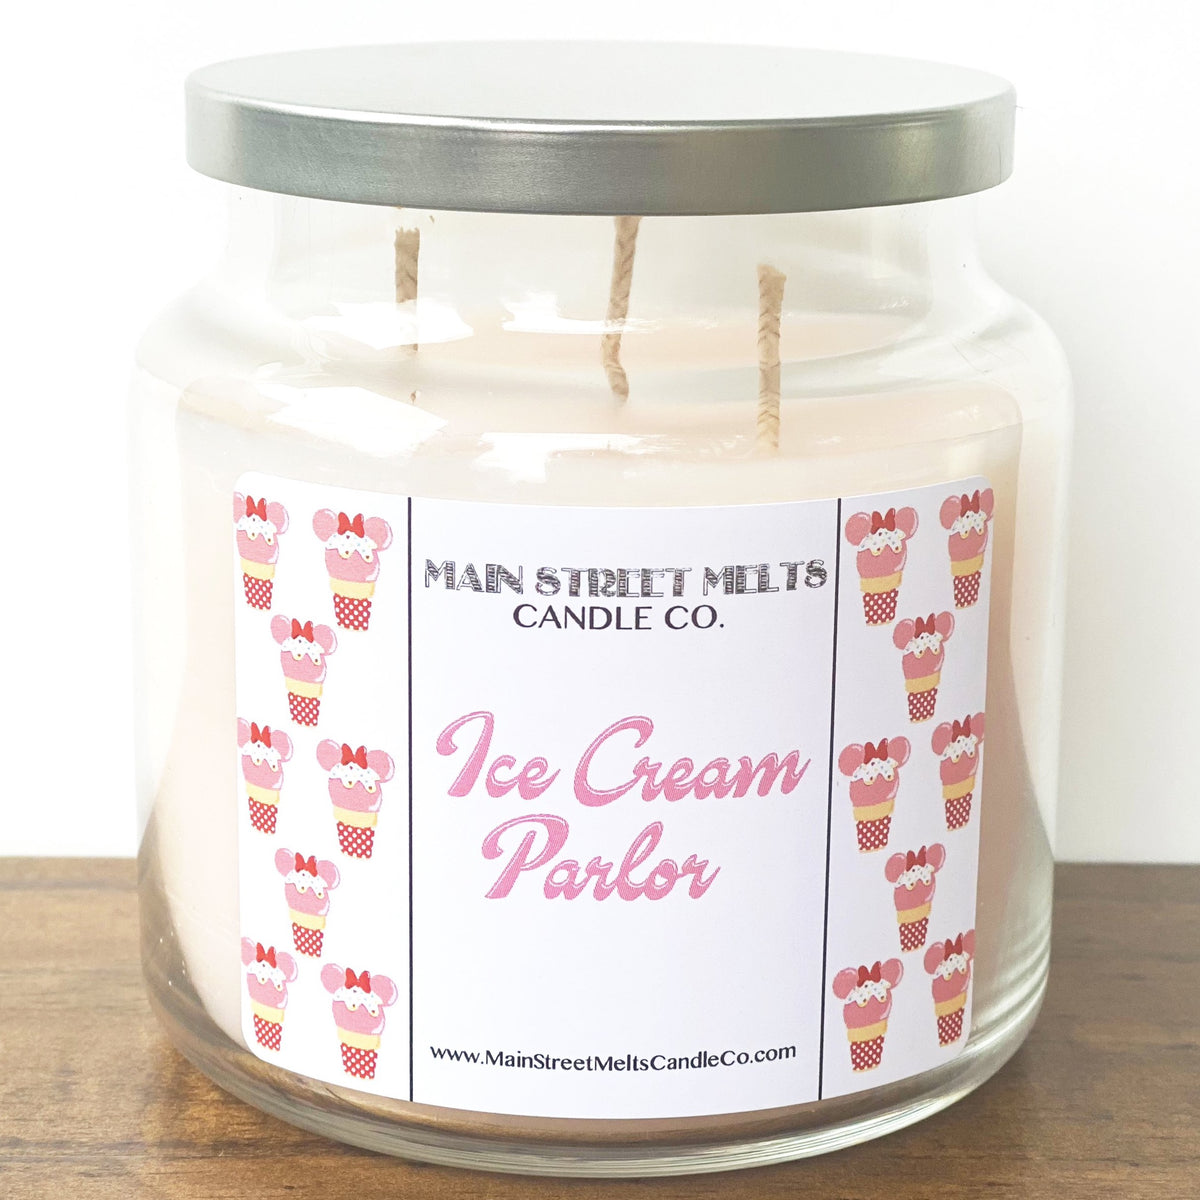 ICE CREAM PARLOR Fragrance Oil for Diffuser Essential Oils Main Street  Melts Candle Co. Disney Inspired Scents Fragrances 5ml Magic Kingdom 